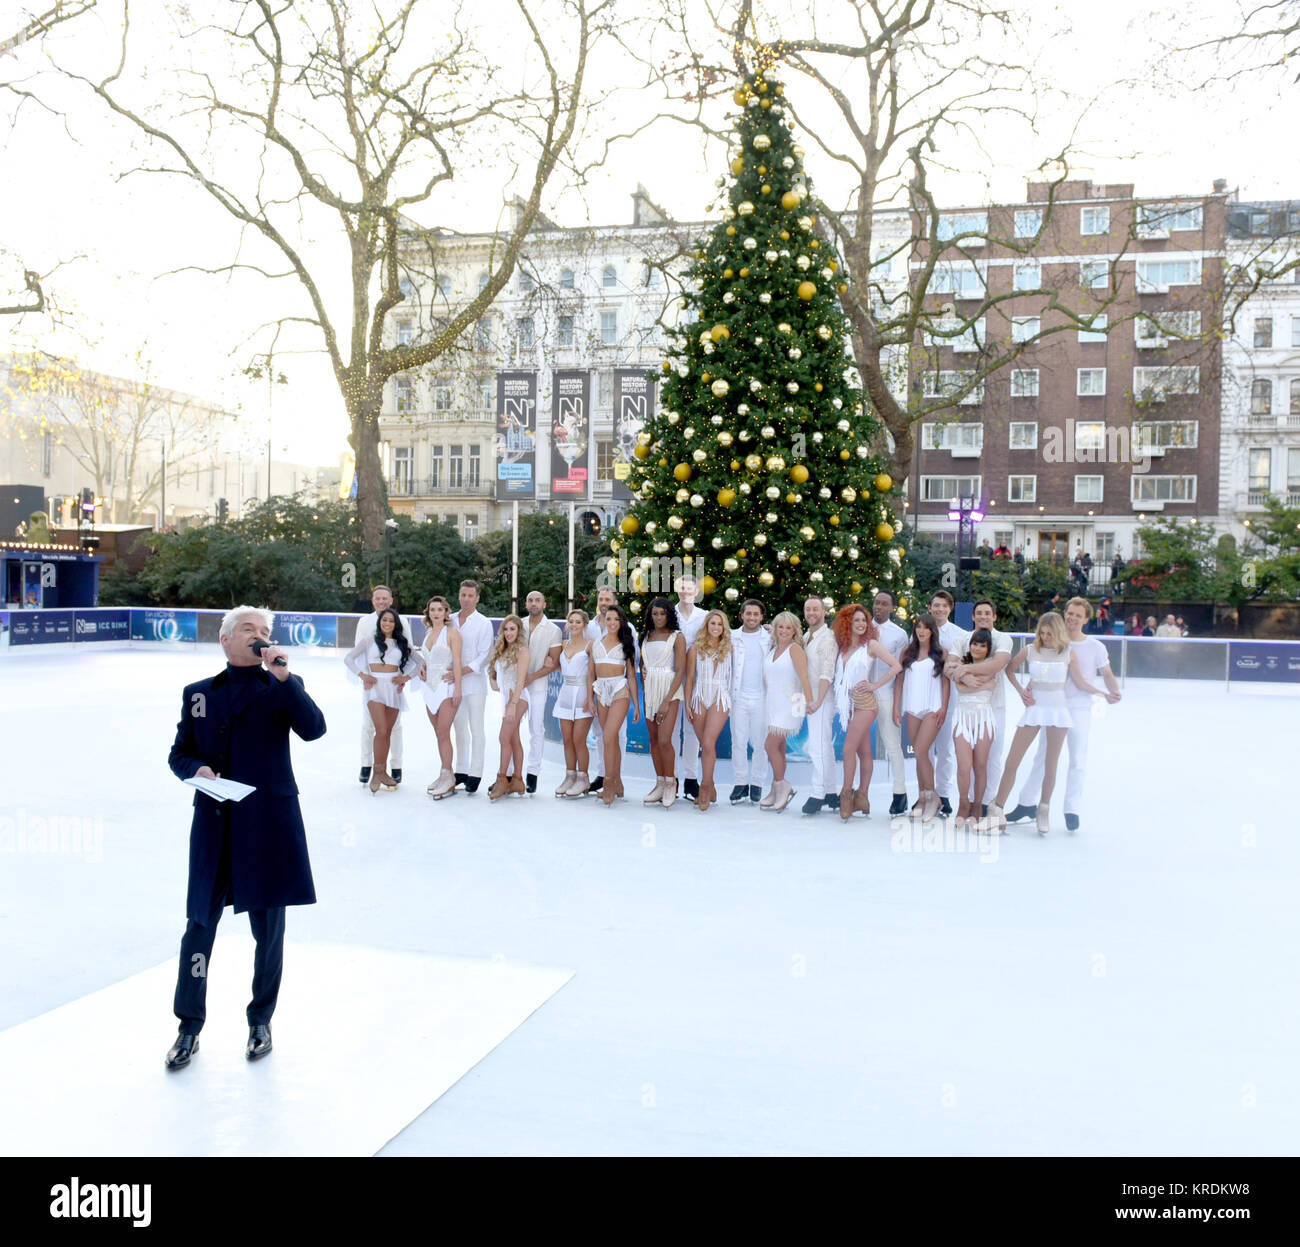 Photo Must Be Credited ©Alpha Press 079965 19/12/2017 Phillip Schofield with Antony Cotton and Brandee Malto, Candice Brown and Matt Evers, Brianne Delcourt and Alex Beresford, Stephanie Waring and Sylvain Longchambon, Vanessa Bauer, Perri Shakes Drayton and Hamish Gaman, Alex Murphy and Kem Cetinay, Cheryl Baker and Dan Daniel Whiston, Melody Le Moal and Lemar, Brooke Vincent and Matej Silecky, Ale Izquierdo and Max Evans, Donna Air and Mark Hanretty at the Dancing on Ice 2018 Photocall held at Natural History Museum Ice Rink in Kensington, London Stock Photo